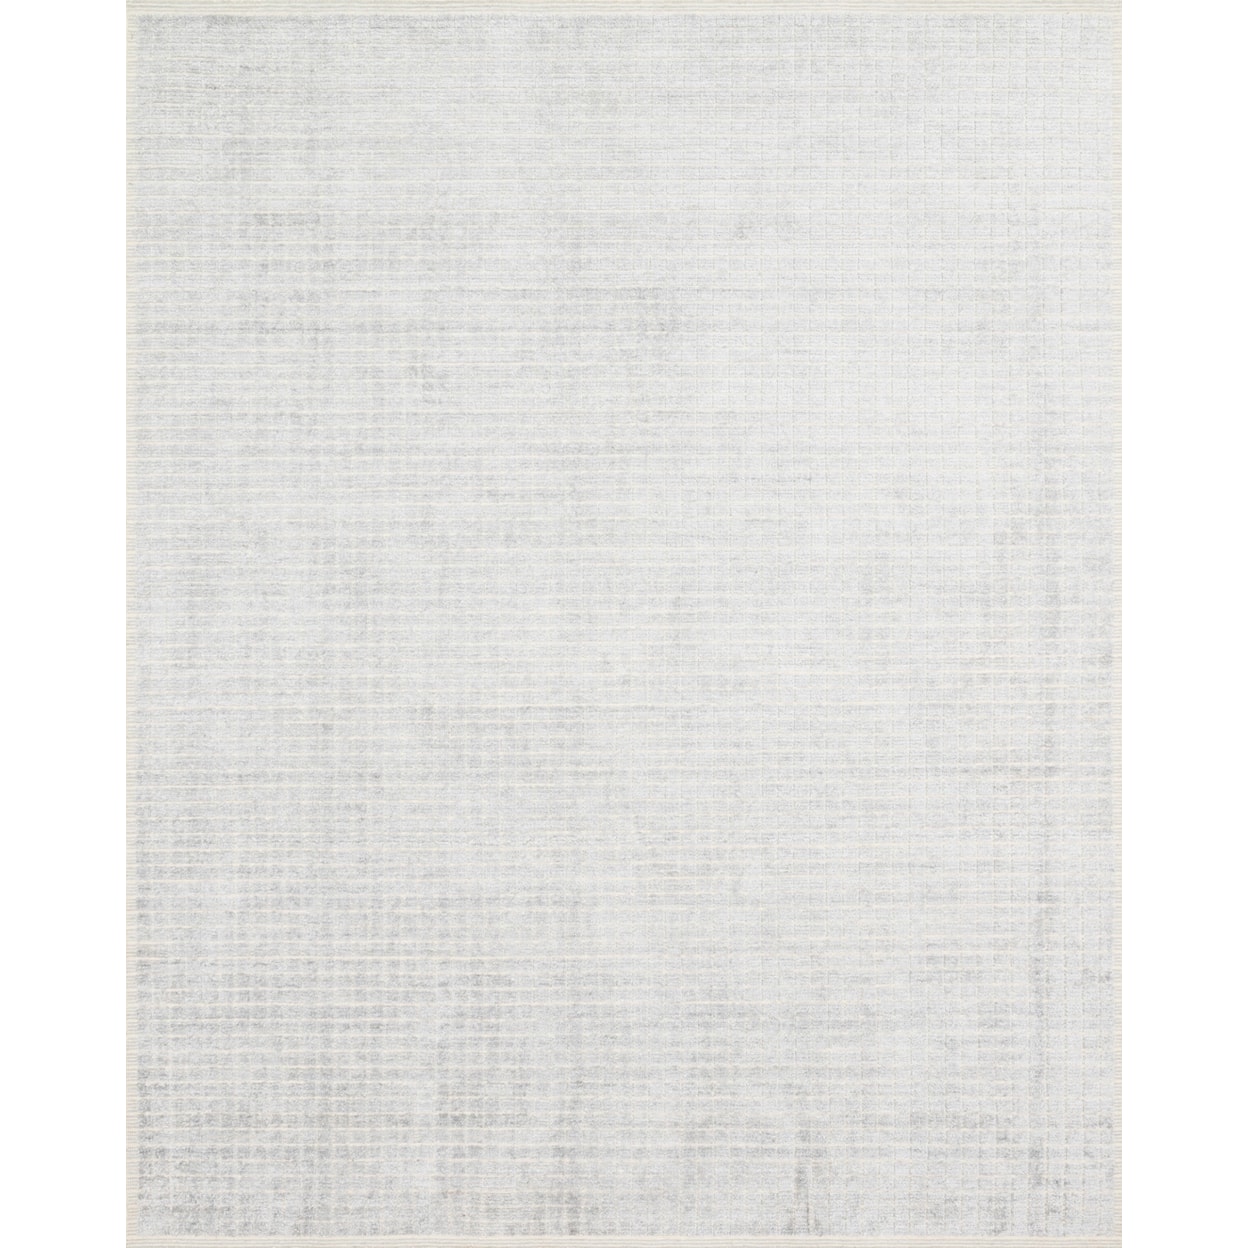 Loloi Rugs Beverly 7'9" x 9'9" Silver / Sky Rug